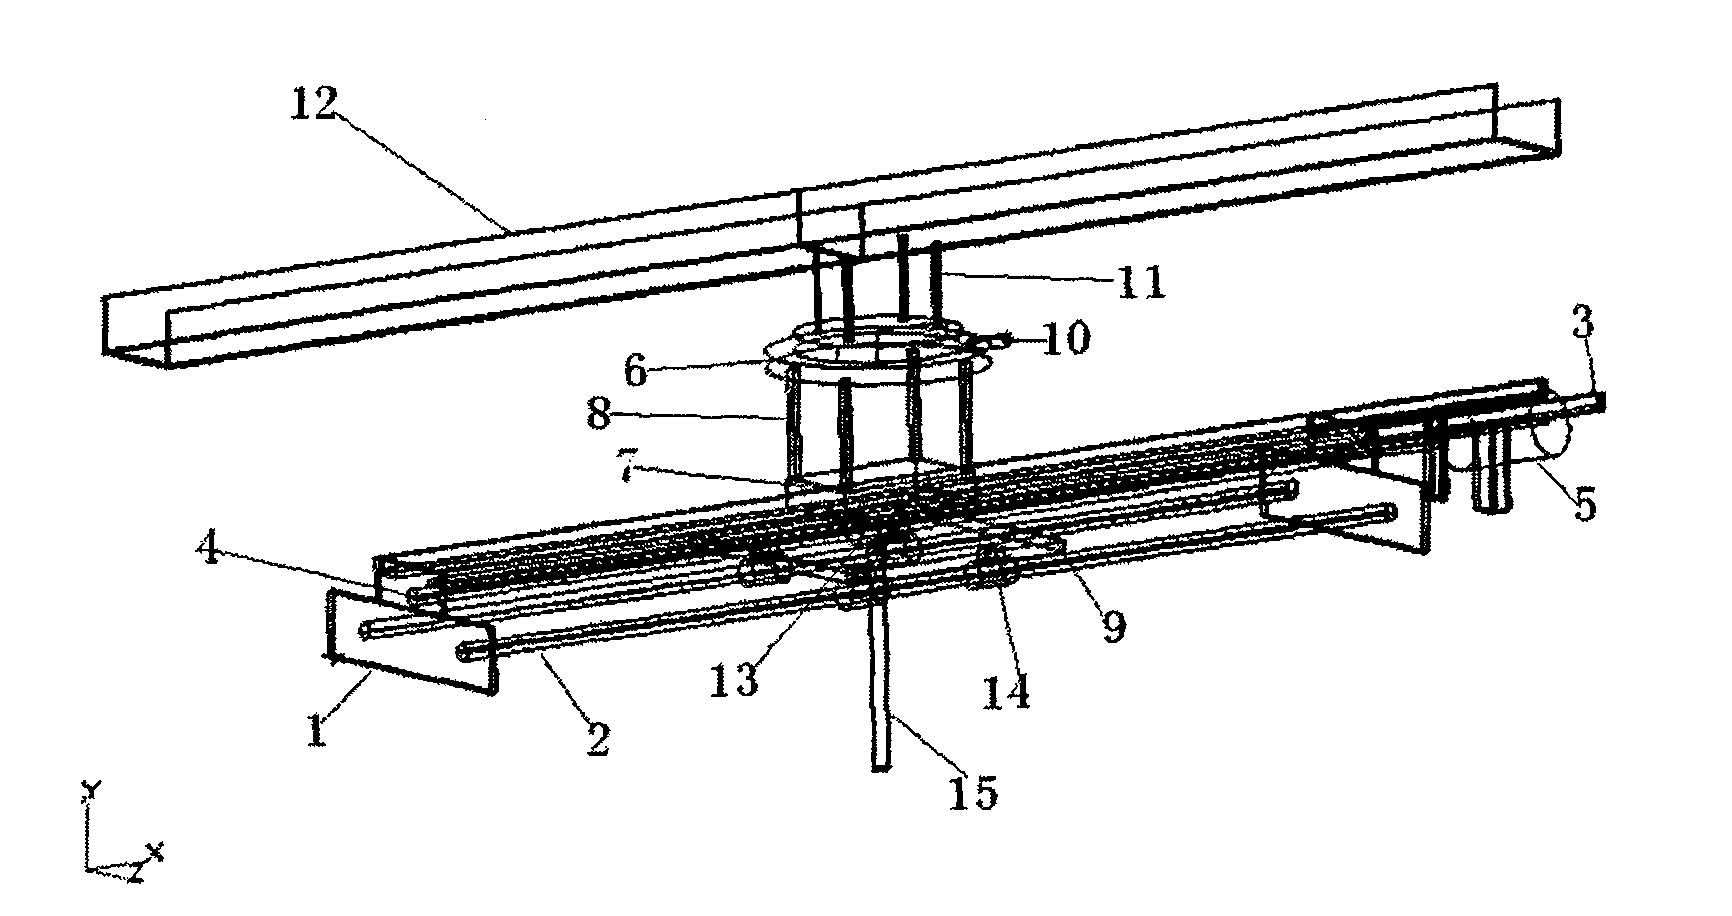 Testing apparatus for automatically measuring marine structure anchoring system stiffness